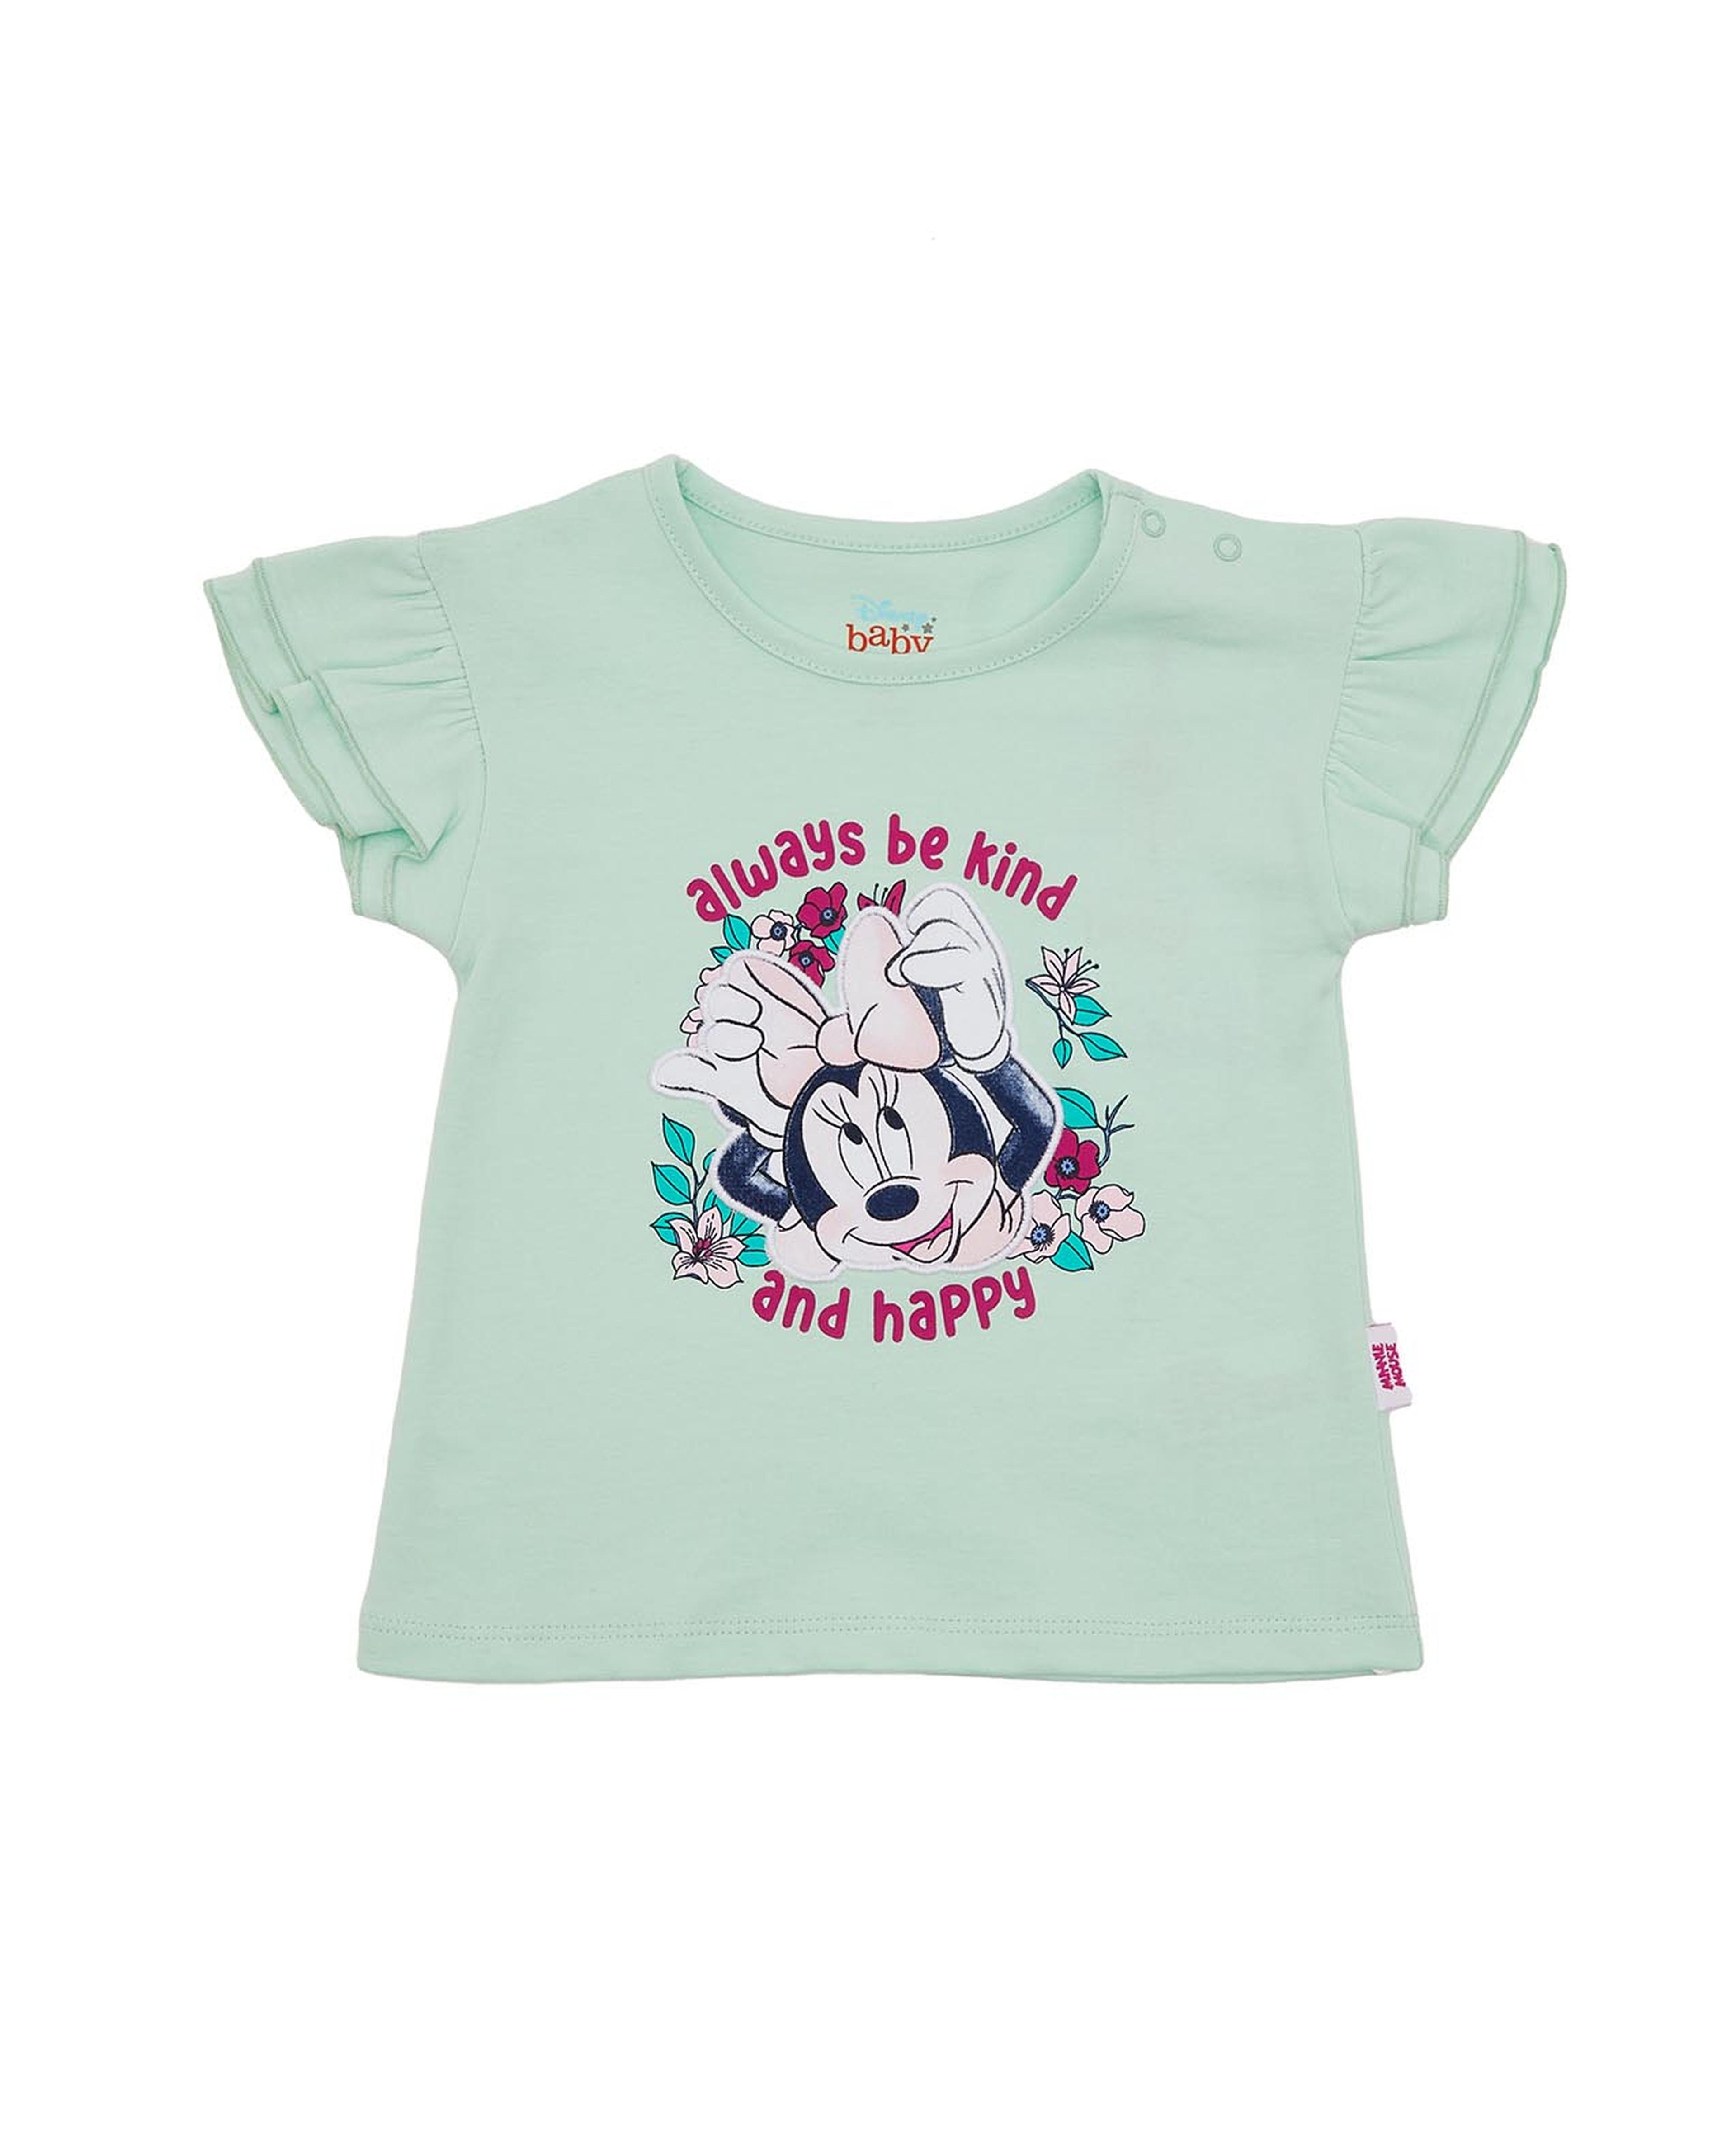 Minnie Mouse Print Top with Crew Neck and Flutter Sleeves